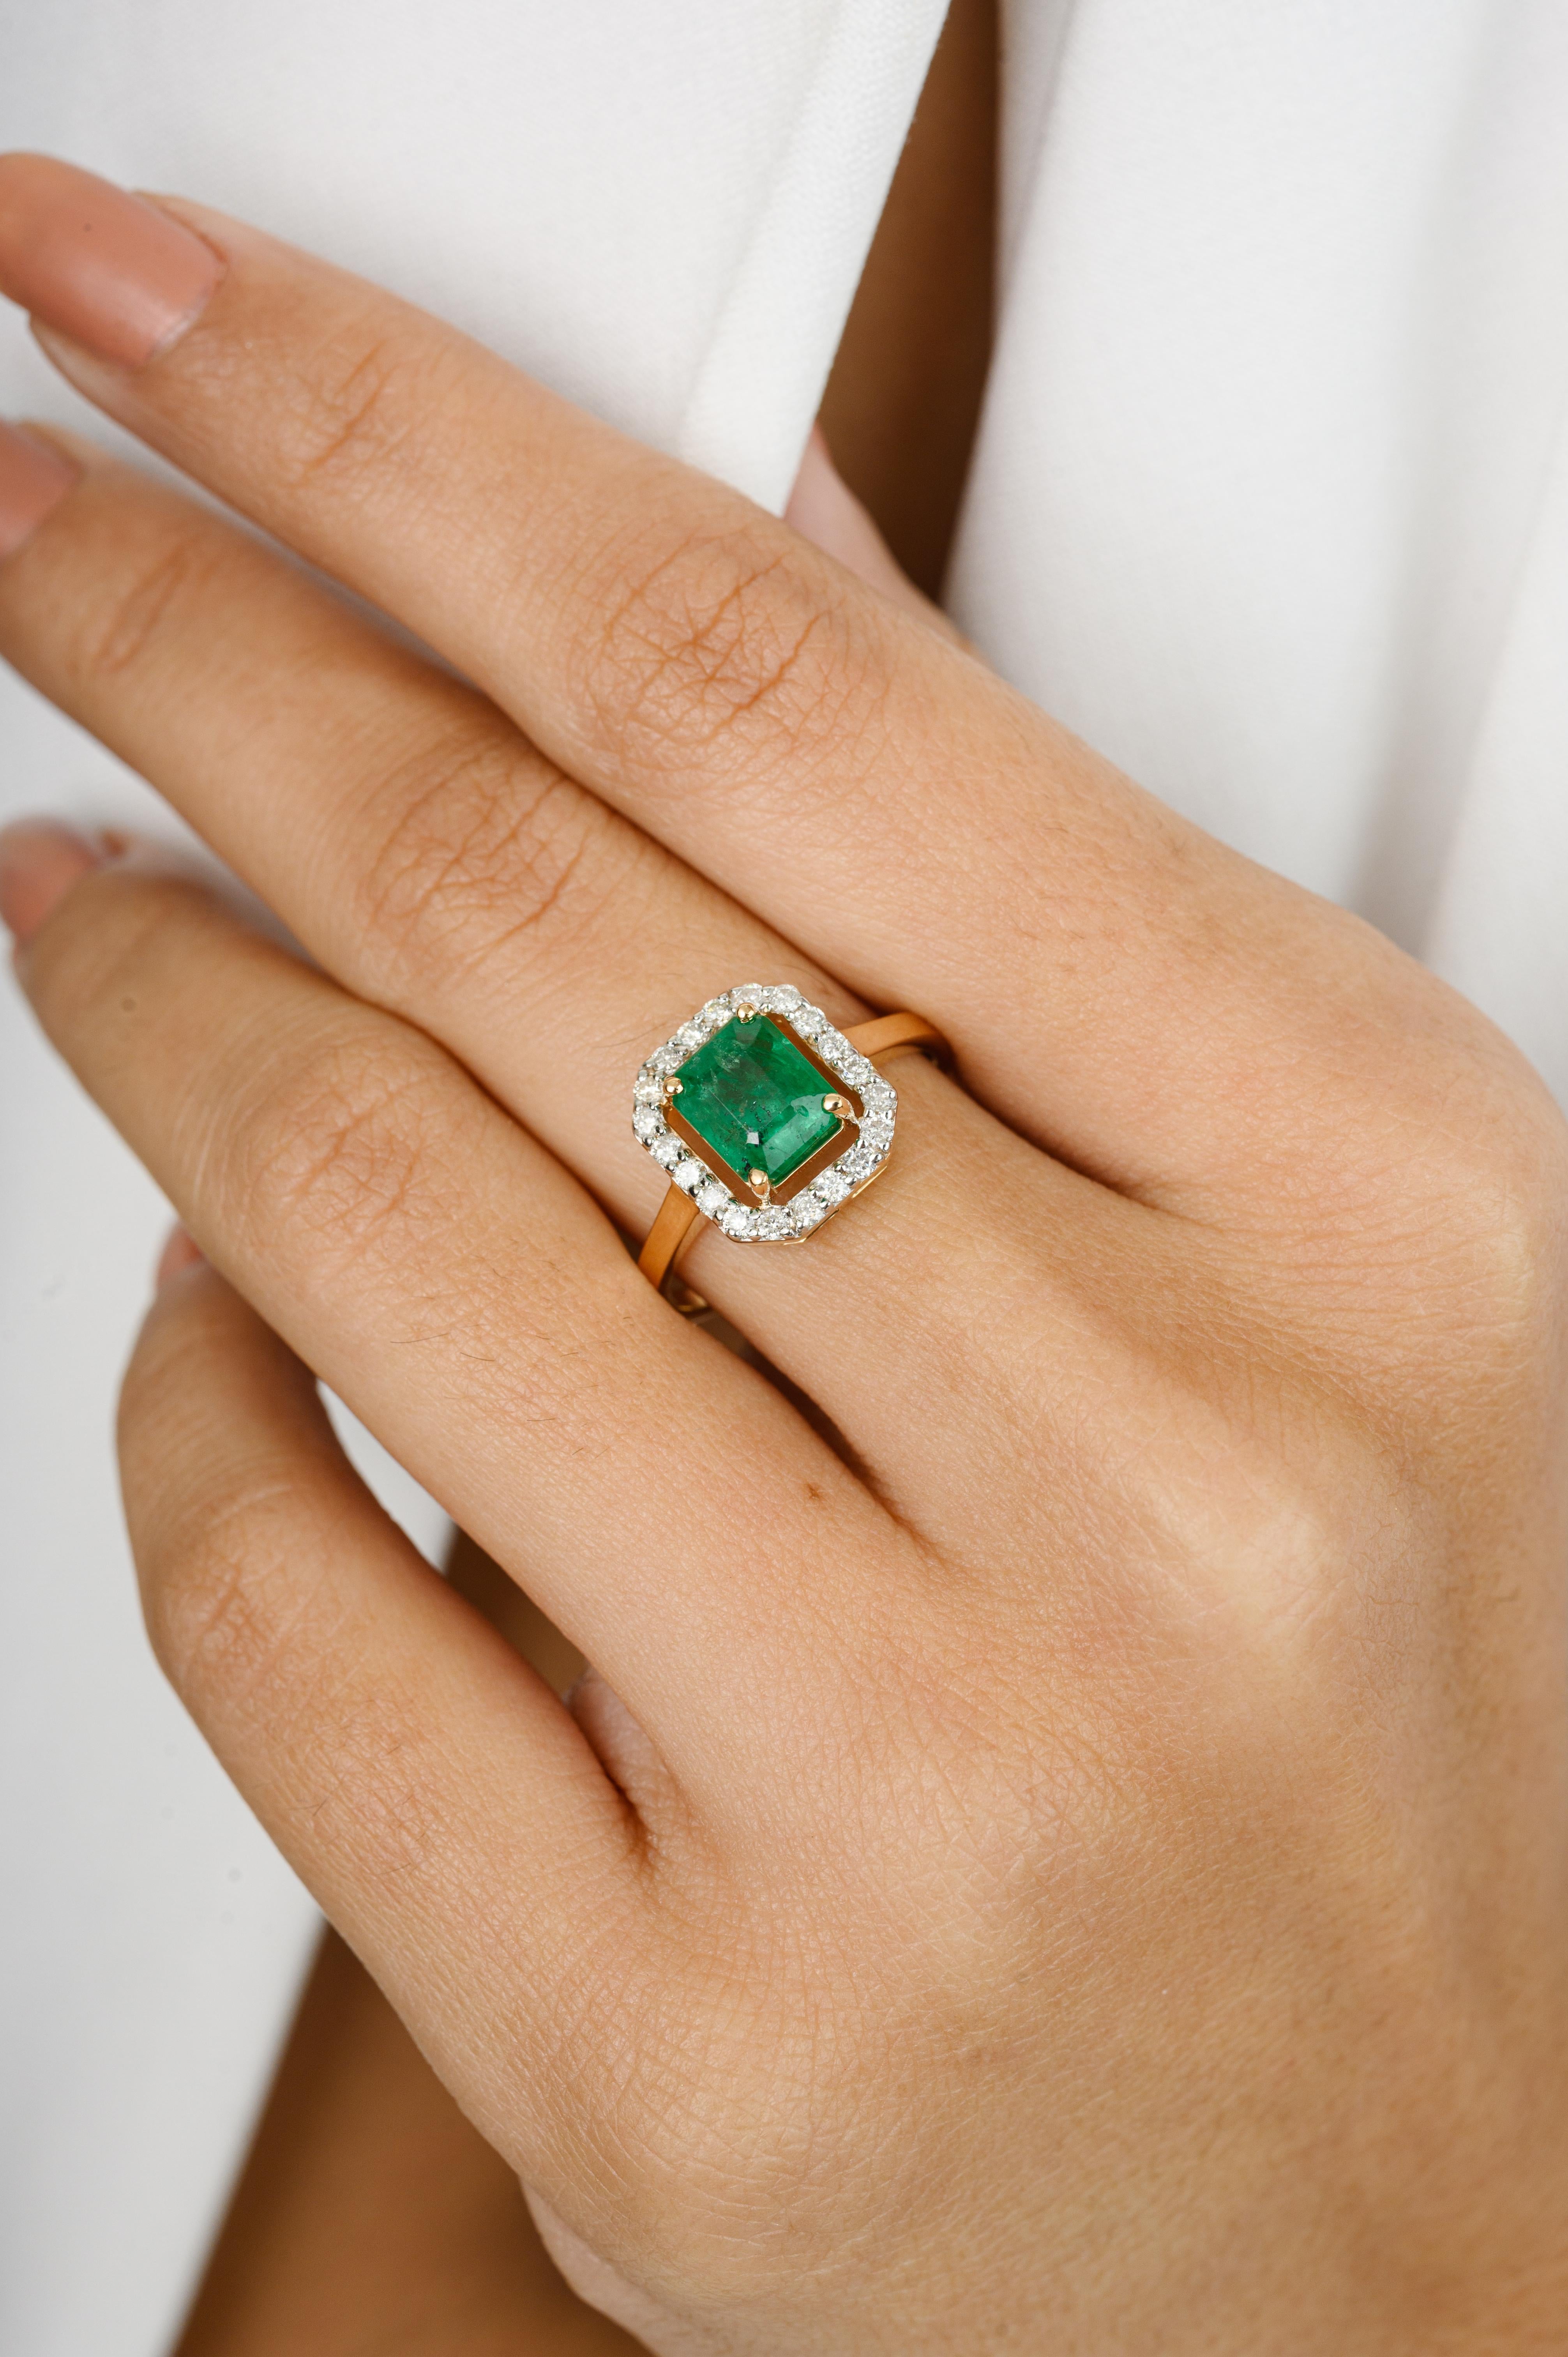 For Sale:  1.5 Carat Octagon Emerald Halo Diamond Wedding Ring in 18k Yellow Gold 7